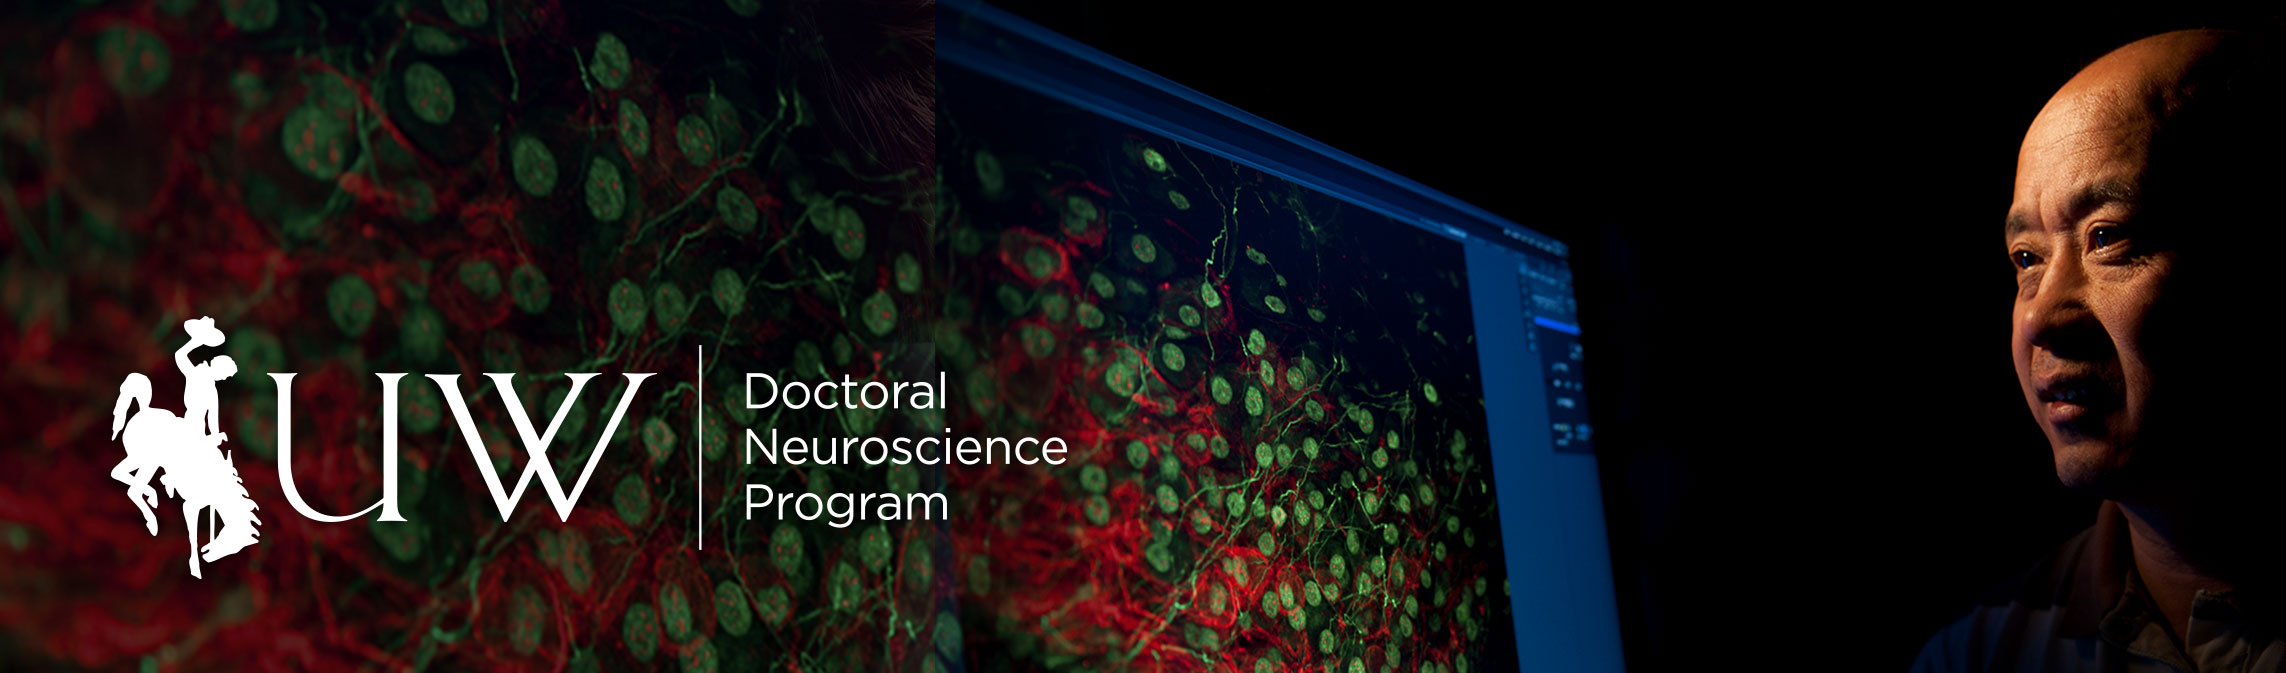 Neuroscience research image with UW Doctoral Neuroscience Program logo on top